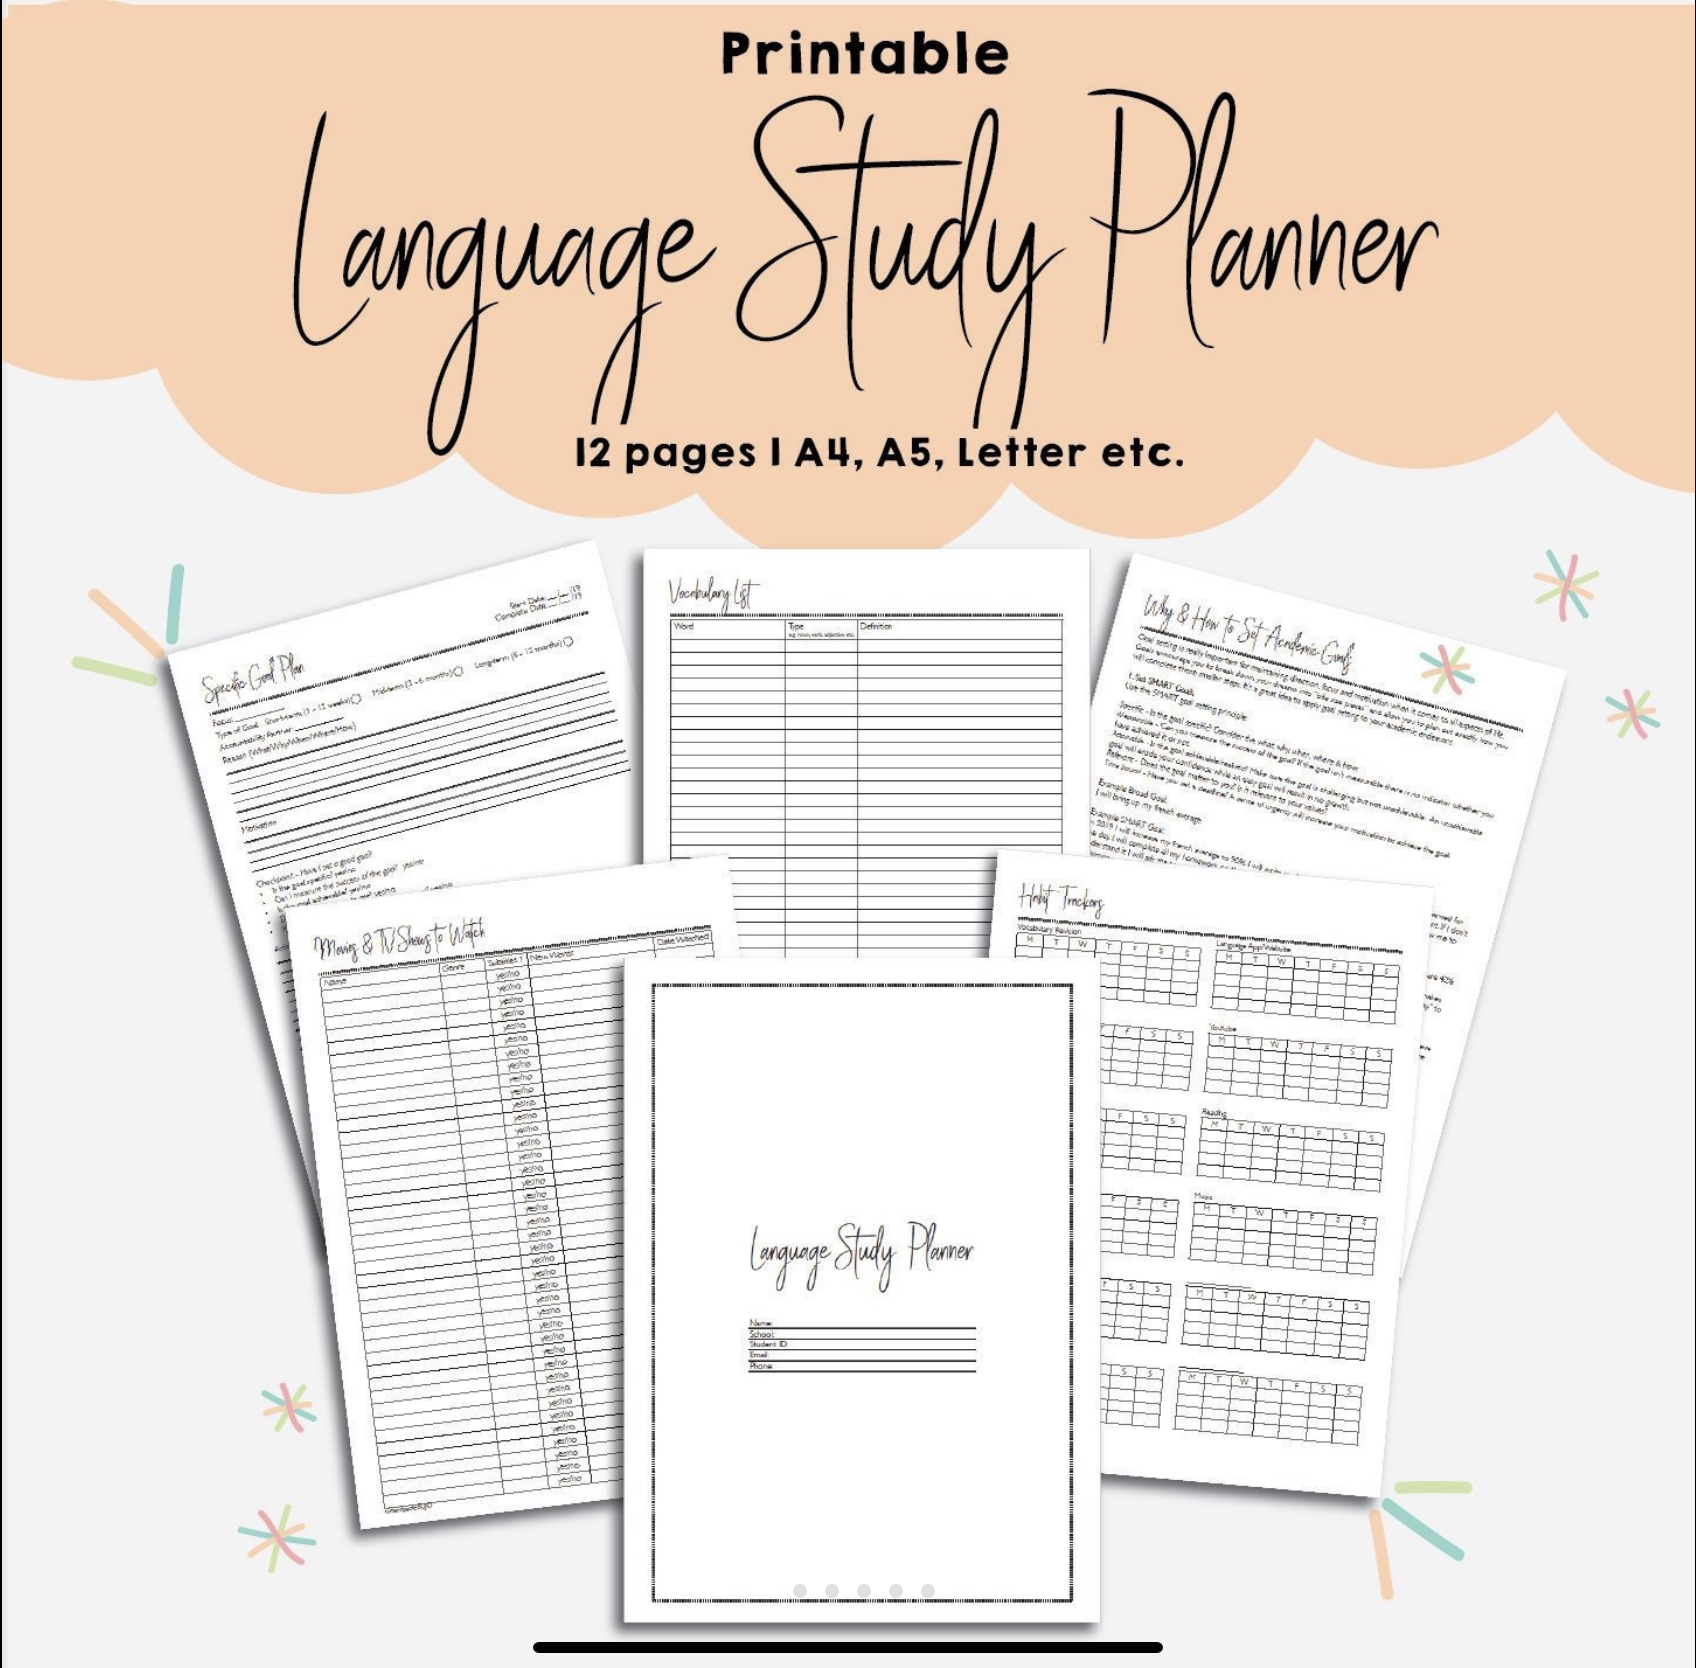 Printable language learning study planner 